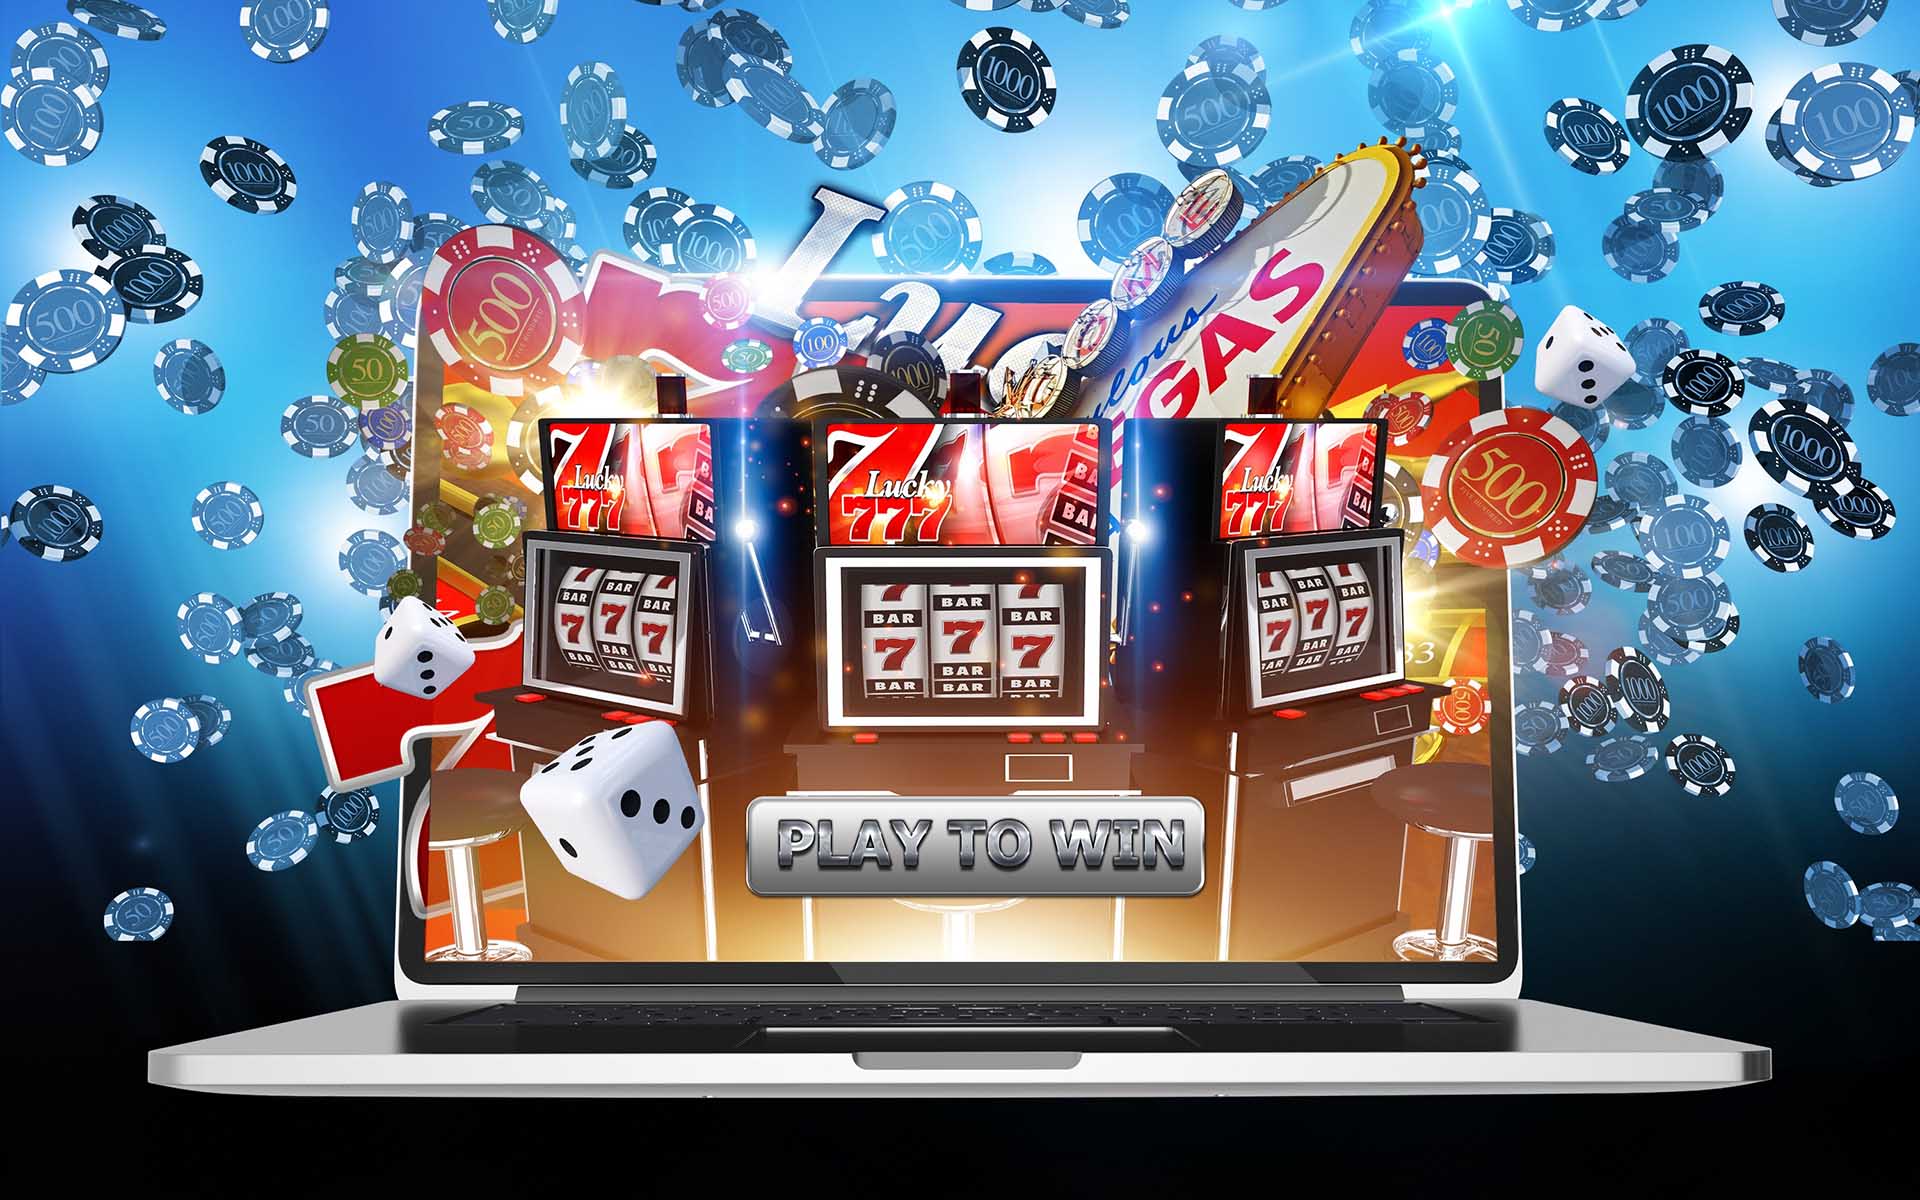 The Ultimate Guide To Best Video Slots Bonuses - Free Spins & $10,000 Match Bonus!